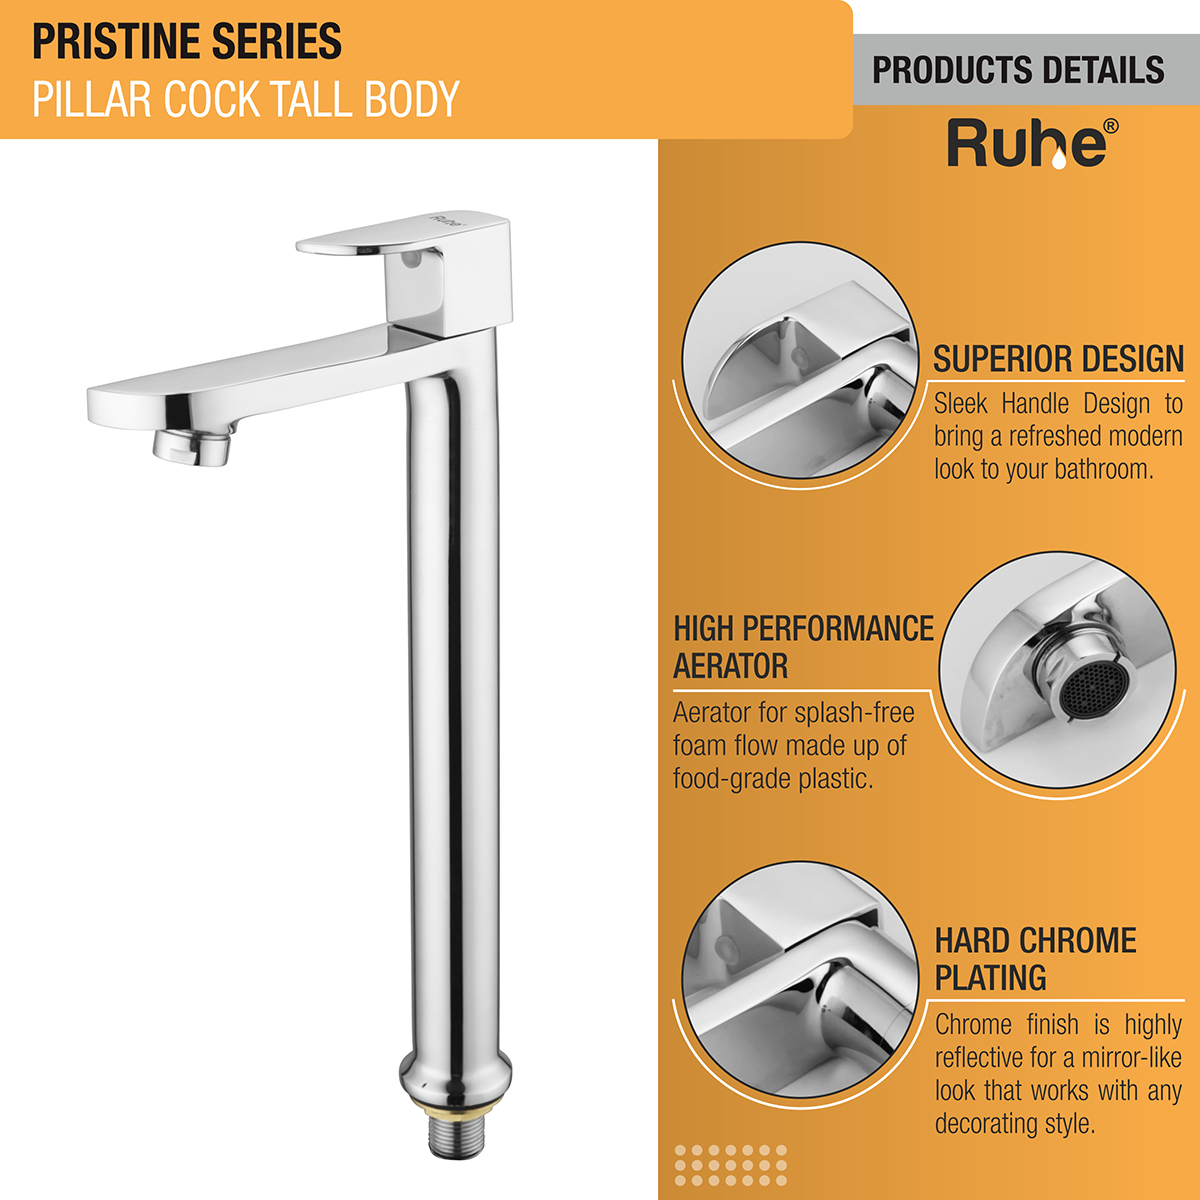 Pristine Pillar Tap Tall Body Brass Faucet product details